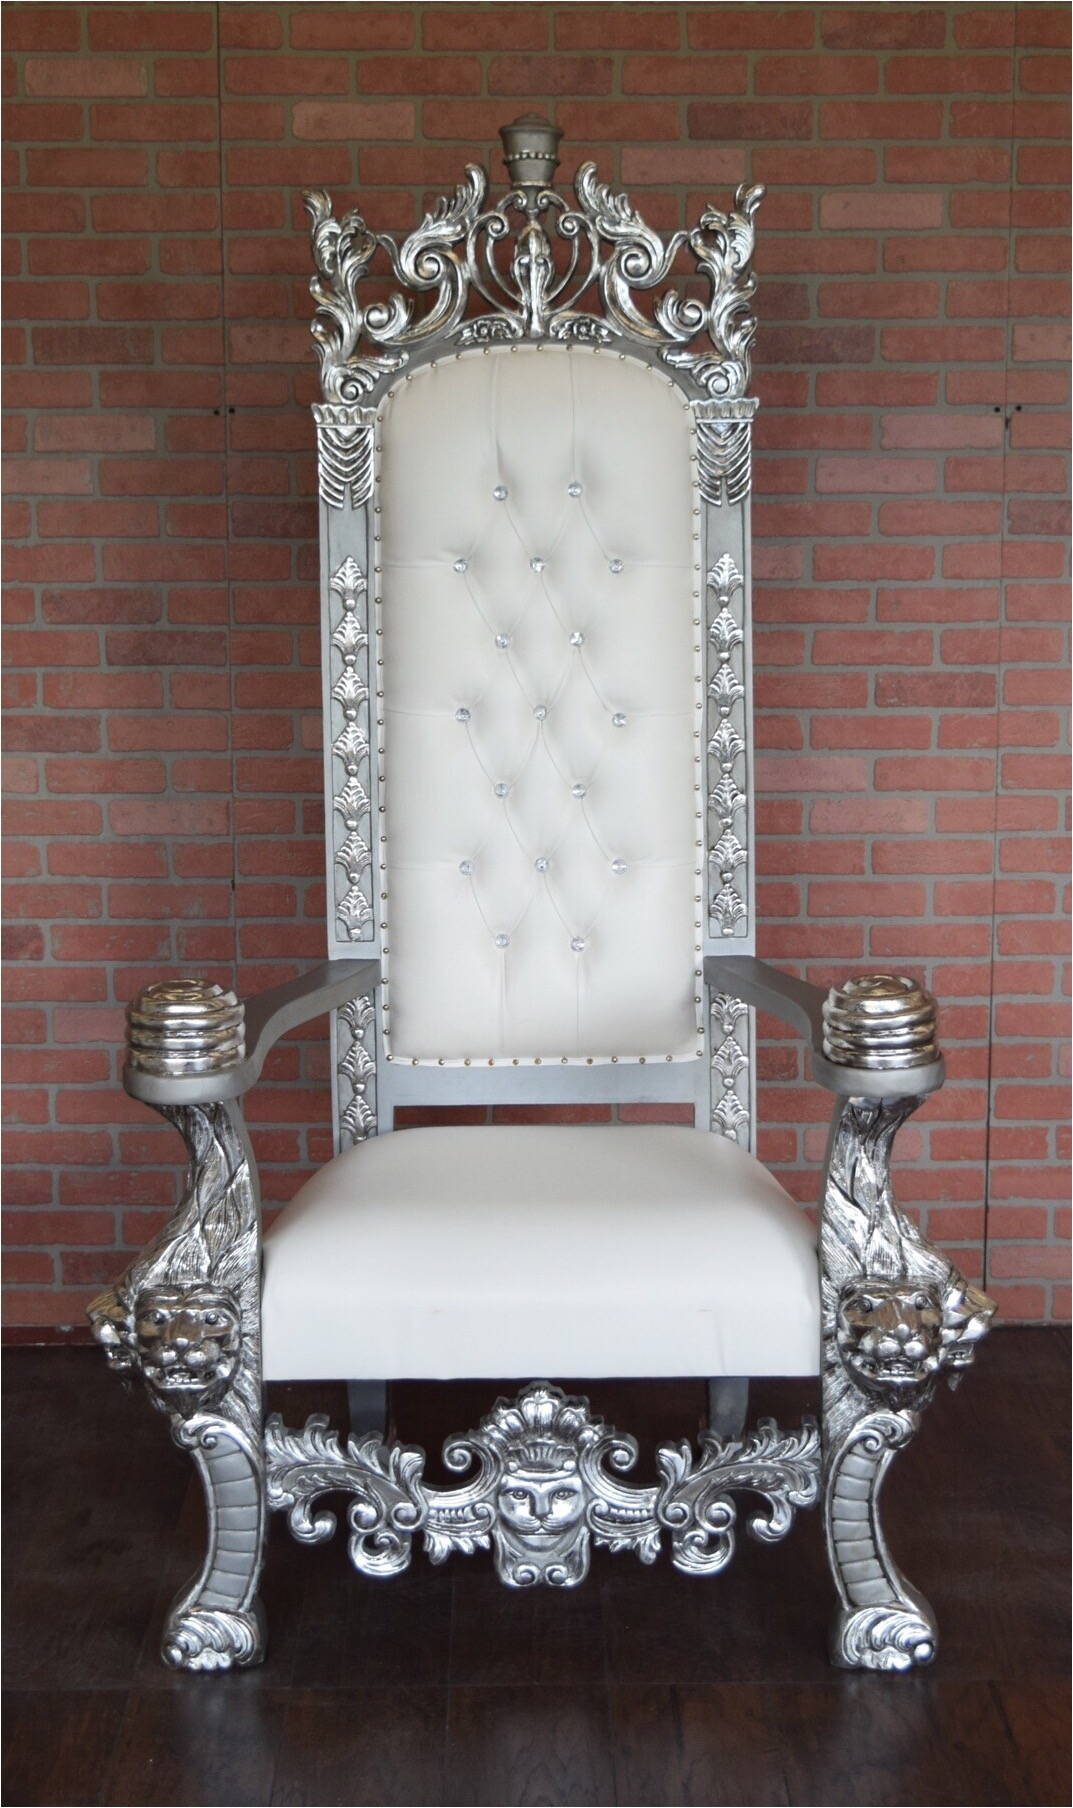 Baby Shower Chairs for Rent Nj Adorable Pictures Of King and Queen Throne Chairs for Rent Best